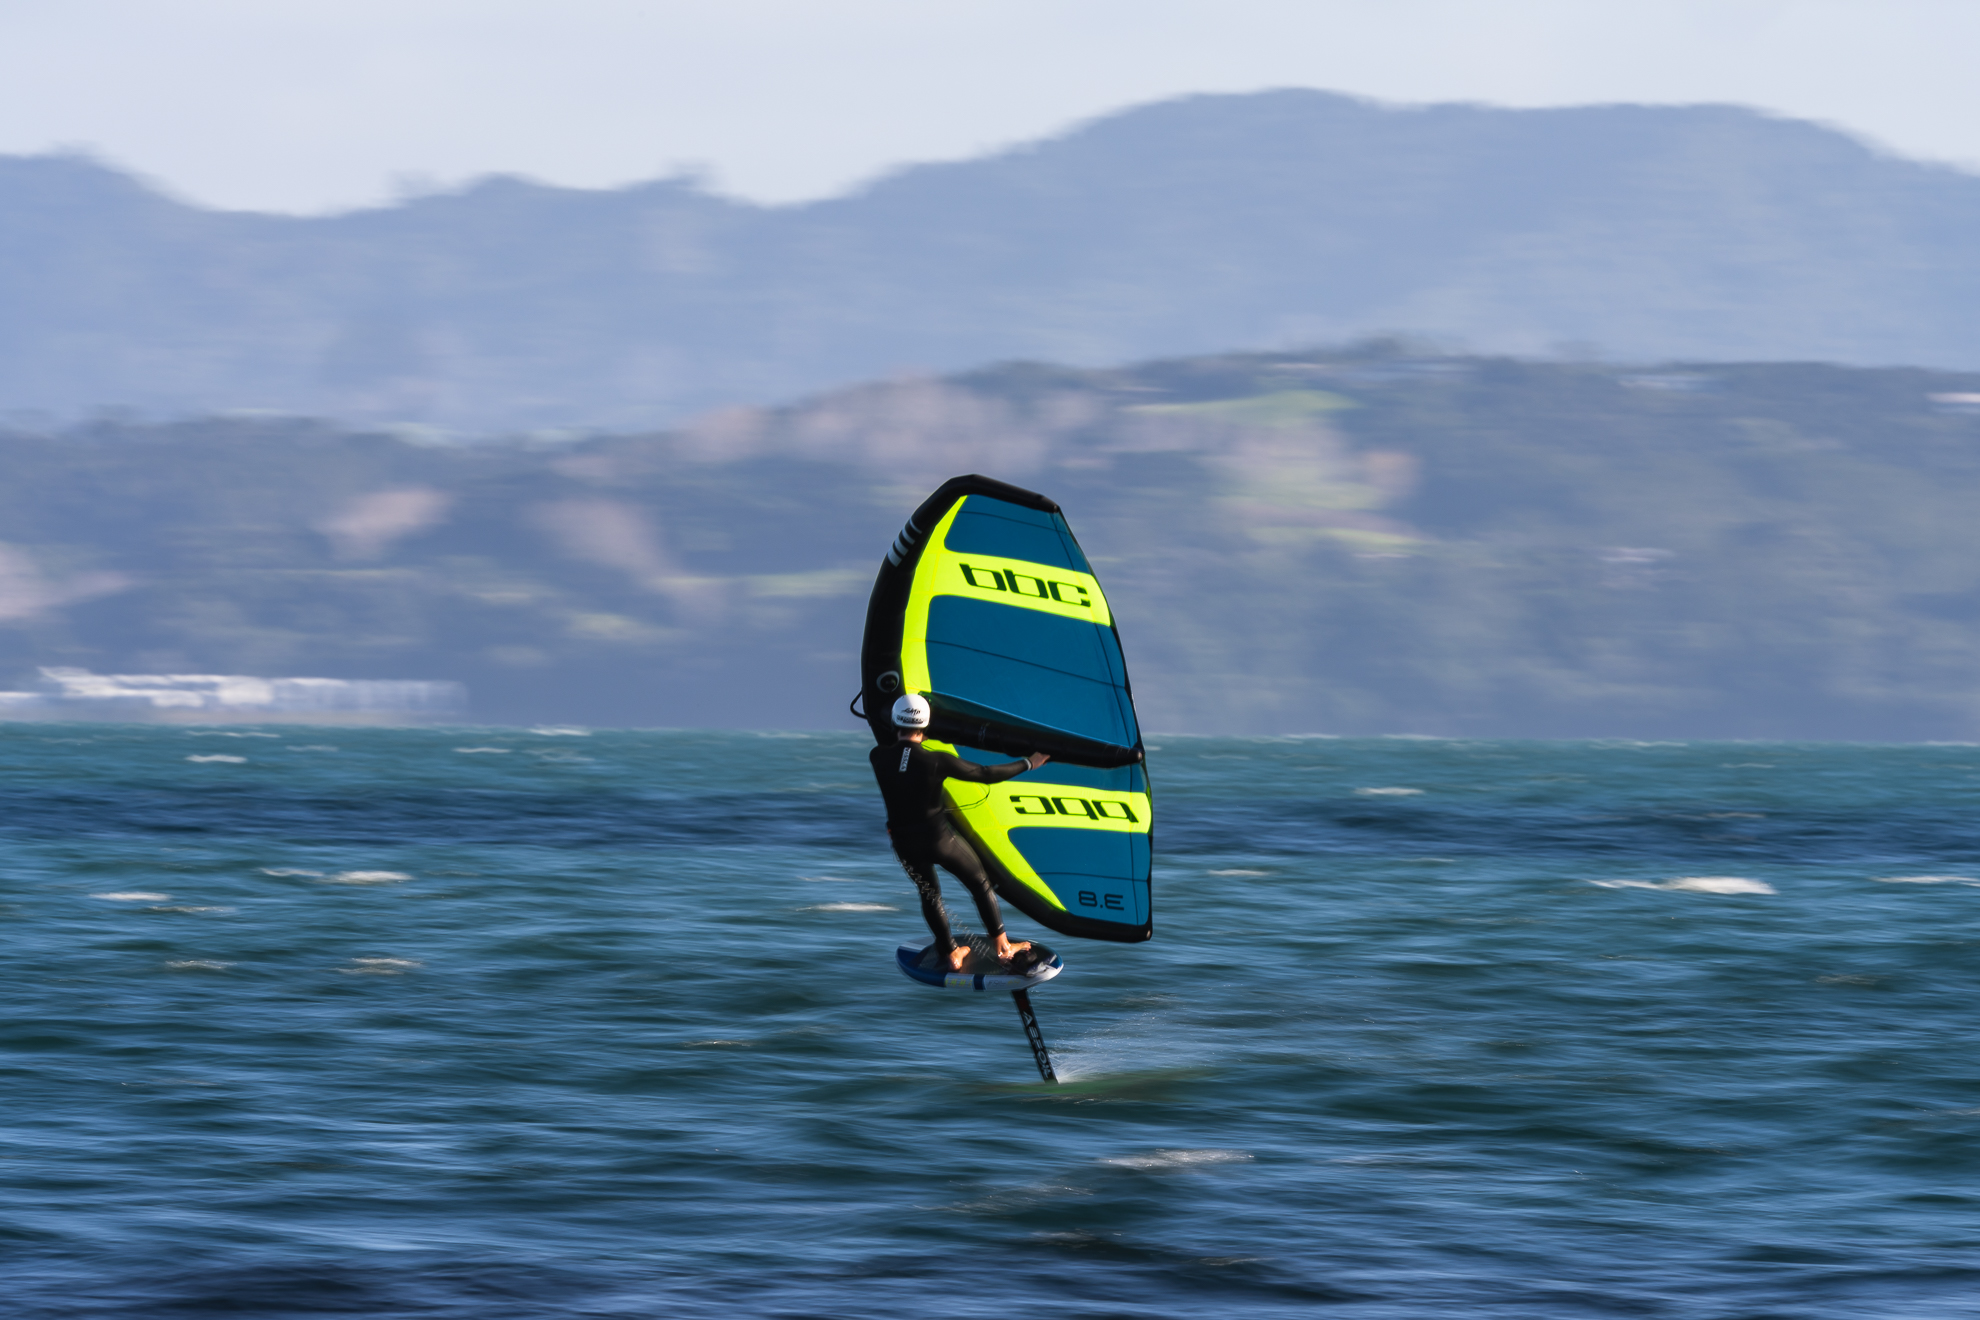 Everything you need to know about Foiling